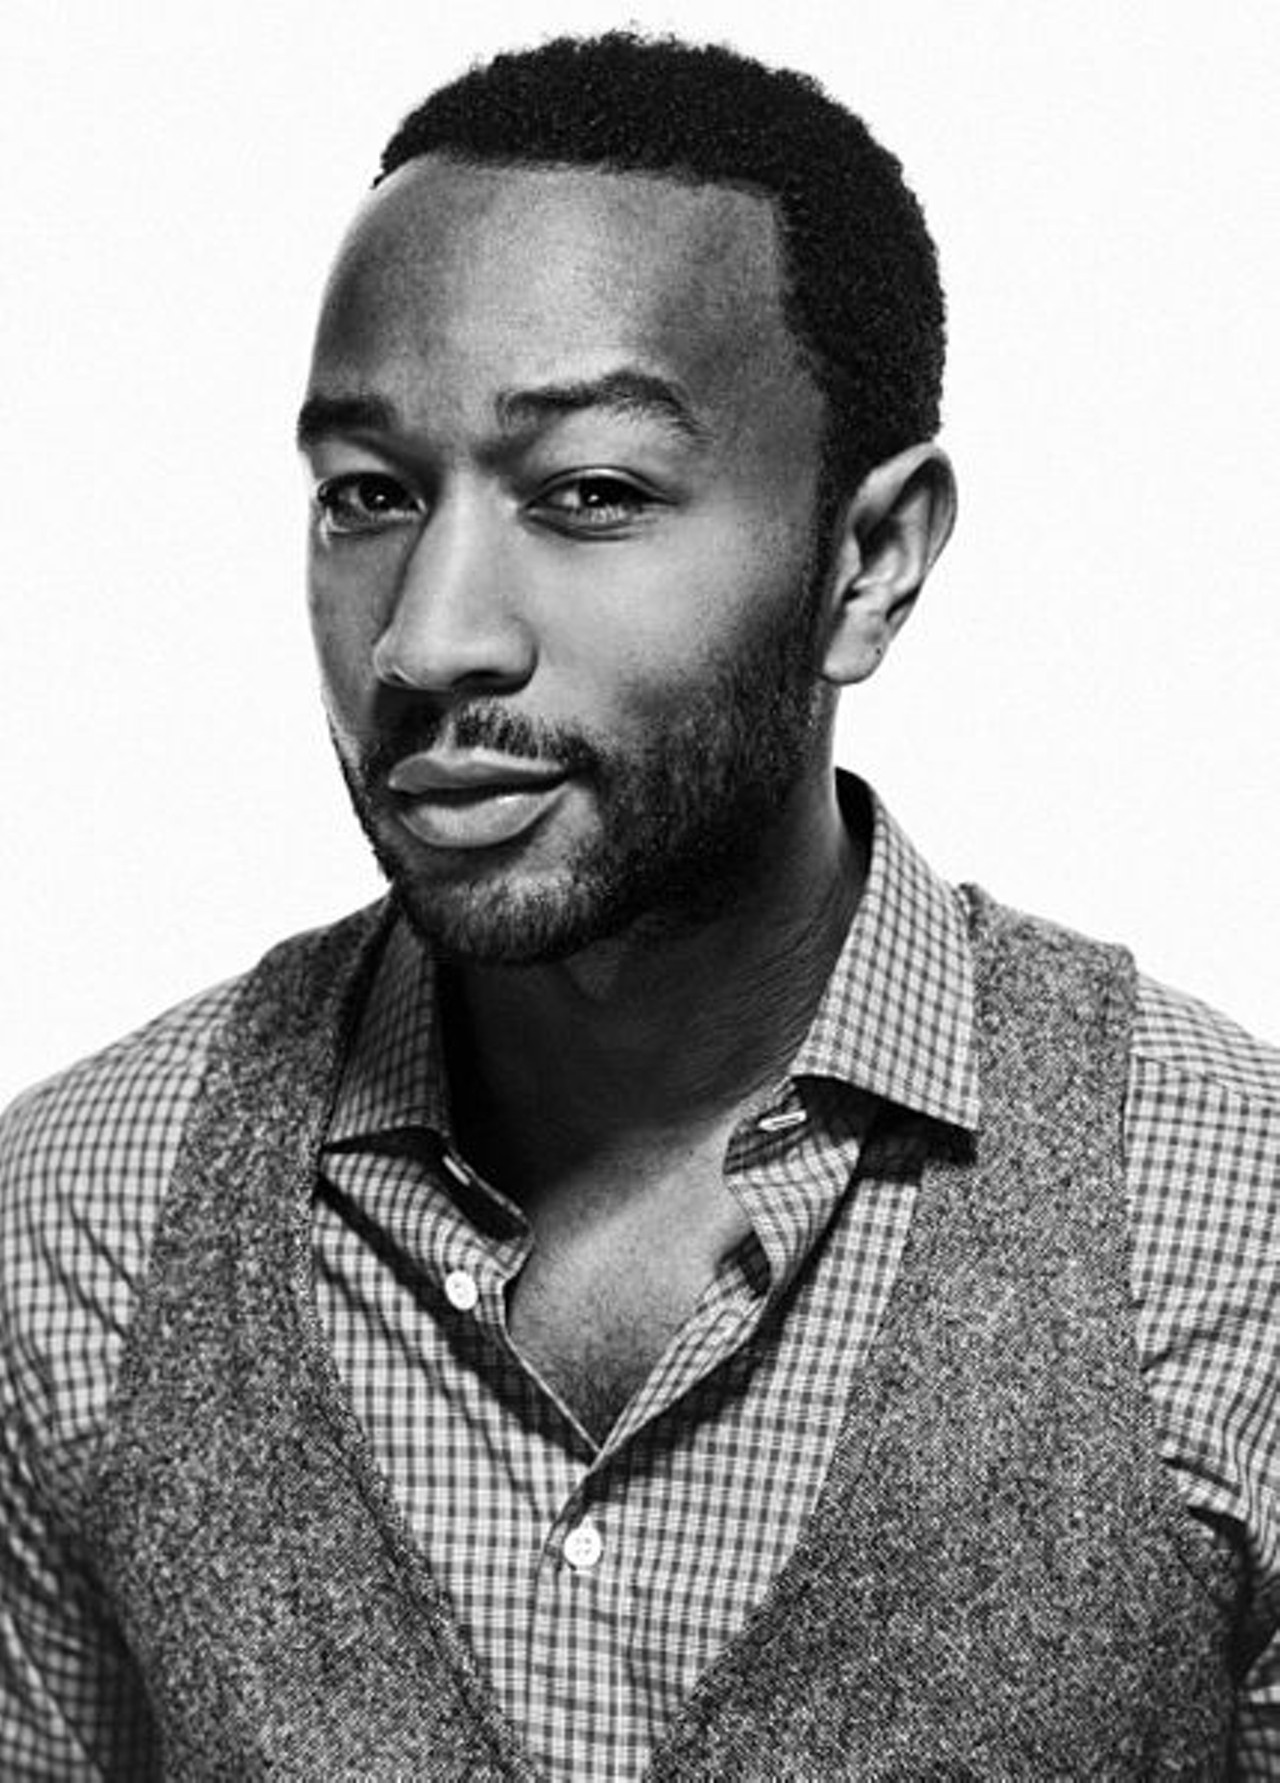 Ohio-born singer-songwriter John Legend had the kind of upbringing that naturally lent itself to a career in music. He sang with his church choir while still a kid and then gravitated to hip-hop and R&B as he got older. His 2004 debut Get Lifted is a terrific, old-school soul album that alternates between romantic ballads ("Let's Gift Lifted") and modernized R&B ("I Can Change"). While the production relies a little too heavily on synthesizers and string arrangements, his new album, Love in the Future, mines similar territory. He performs tonight at 8 p.m. at the State Theater. Tickets are $38.50-$86. (Niesel)